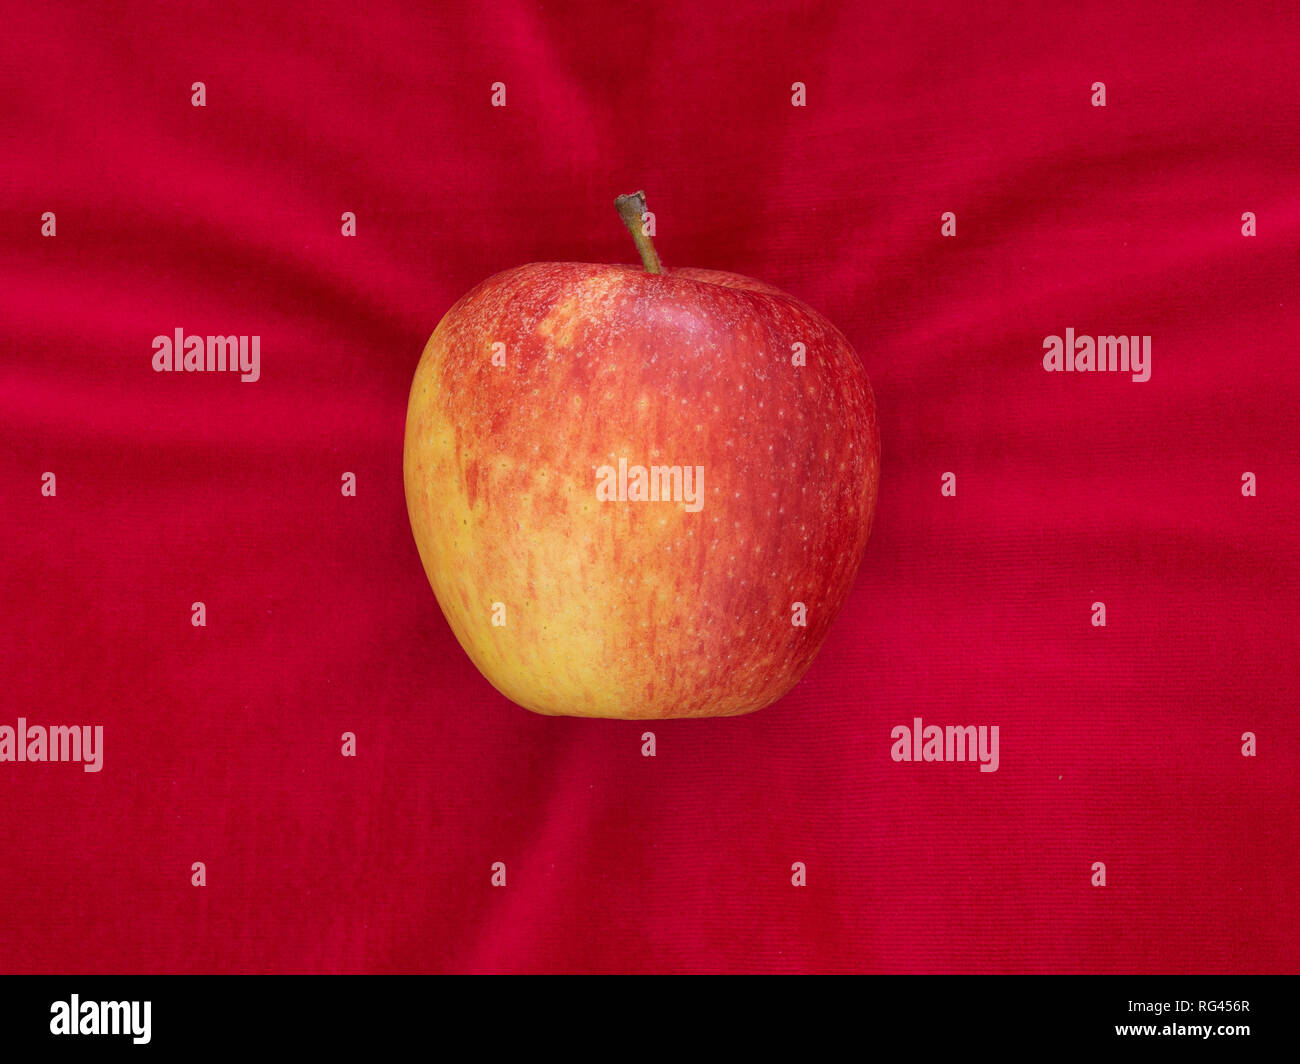 Apple on red velvet cushion, temptation or luxury, with copyspace. Stock Photo